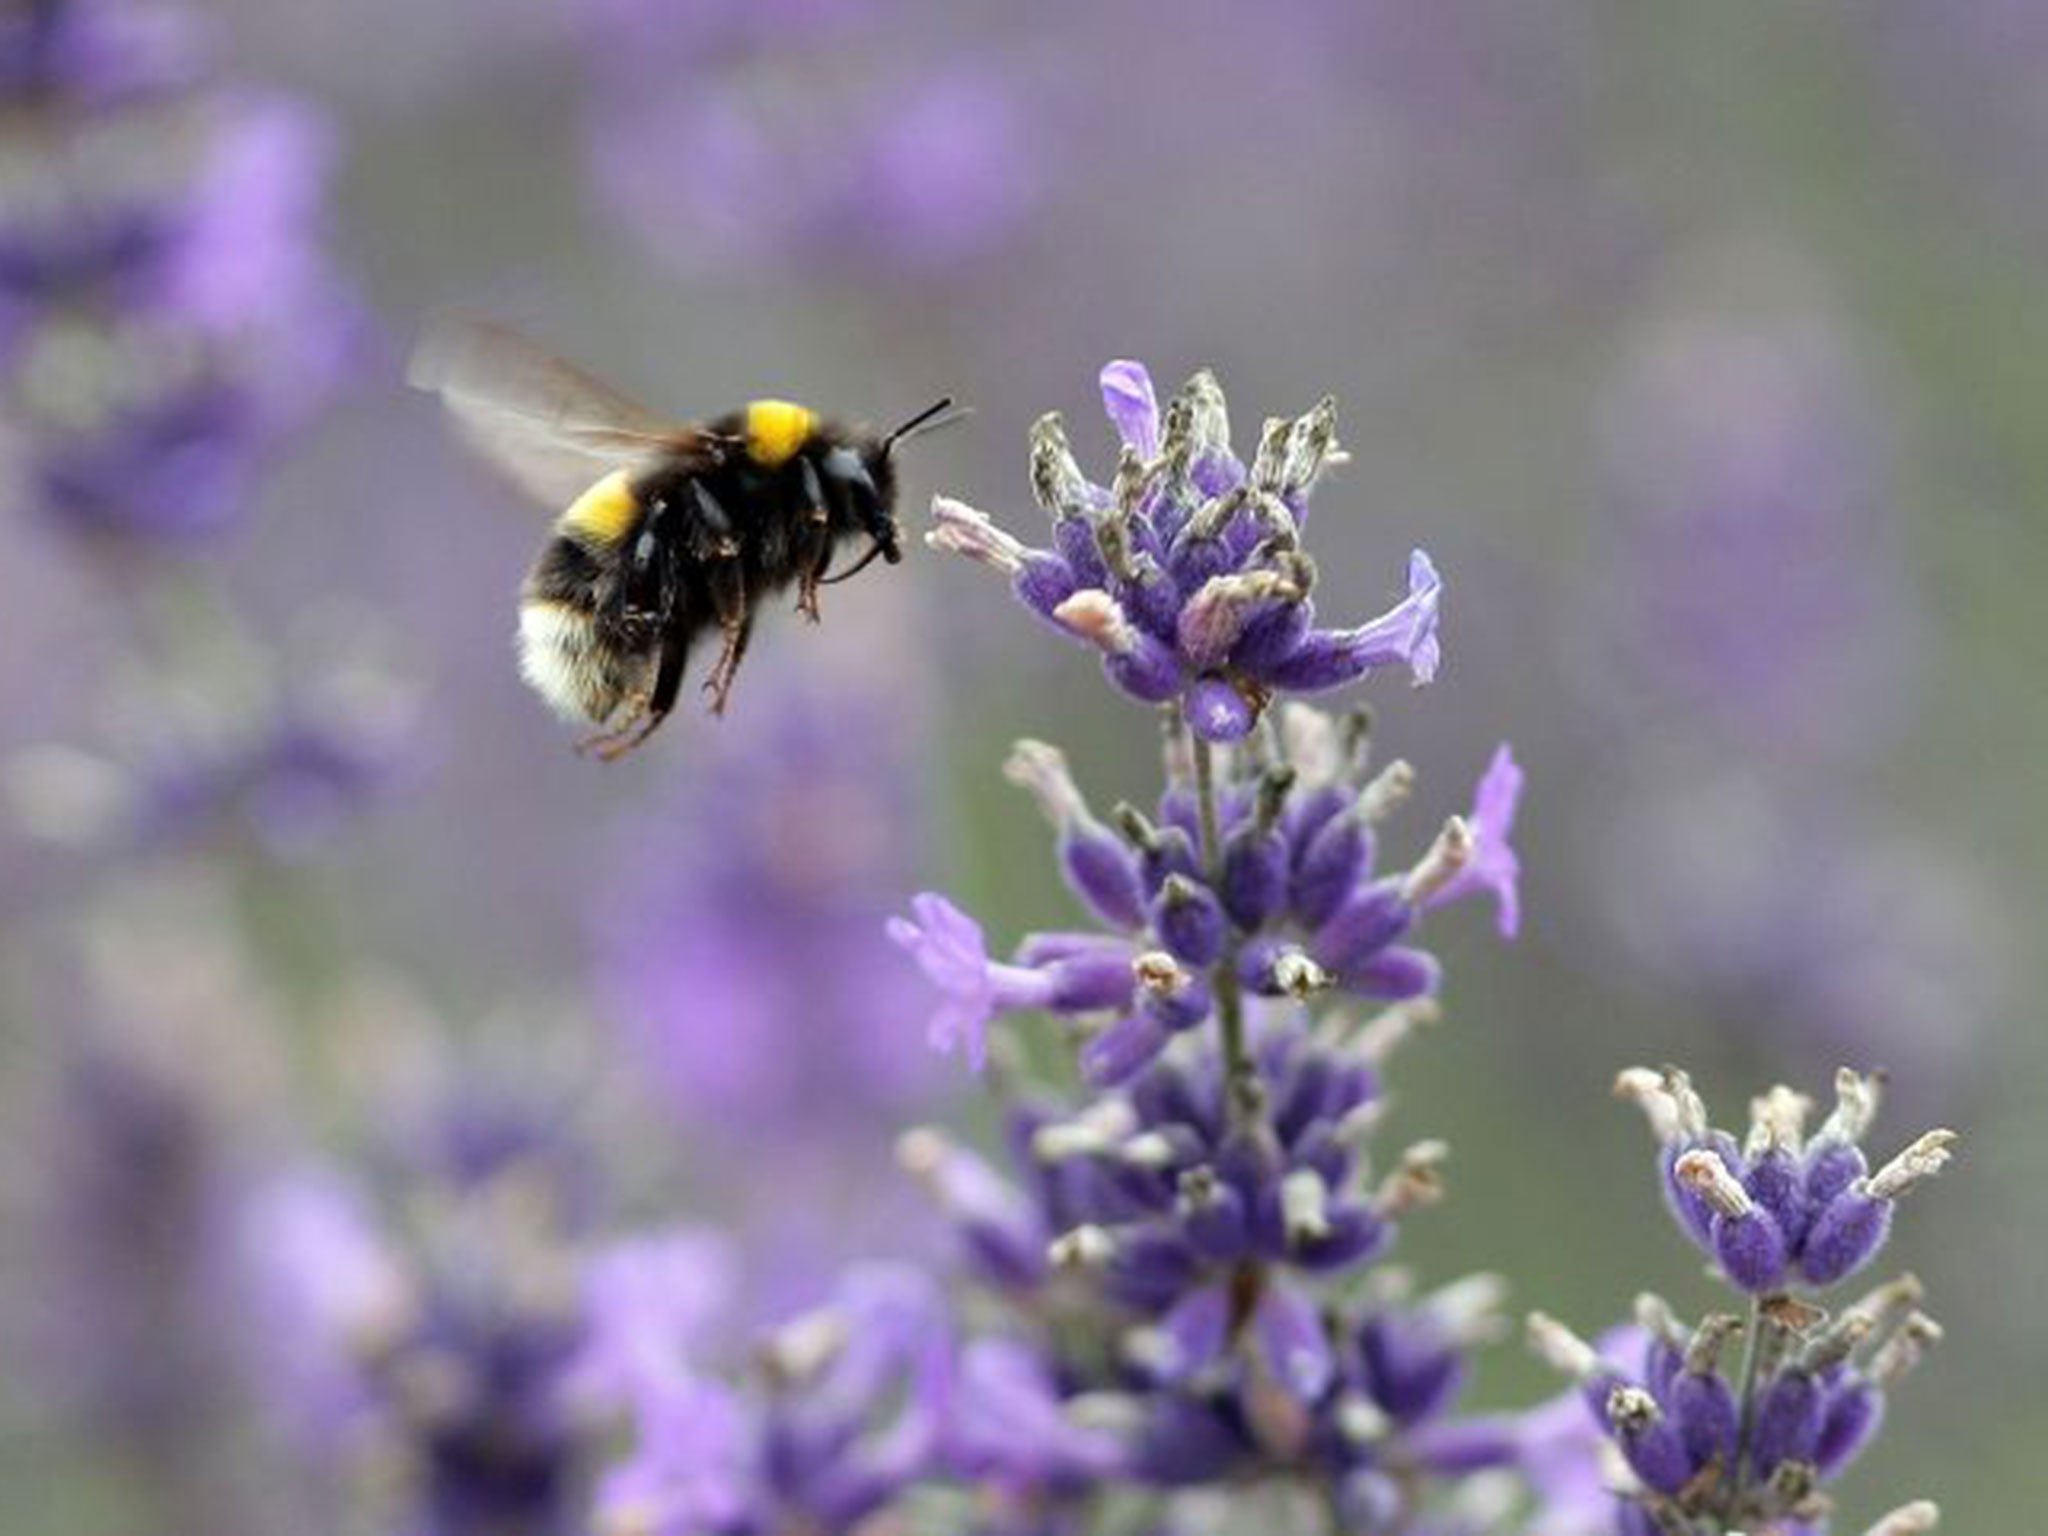 Neonics have been linked to the decline of bees